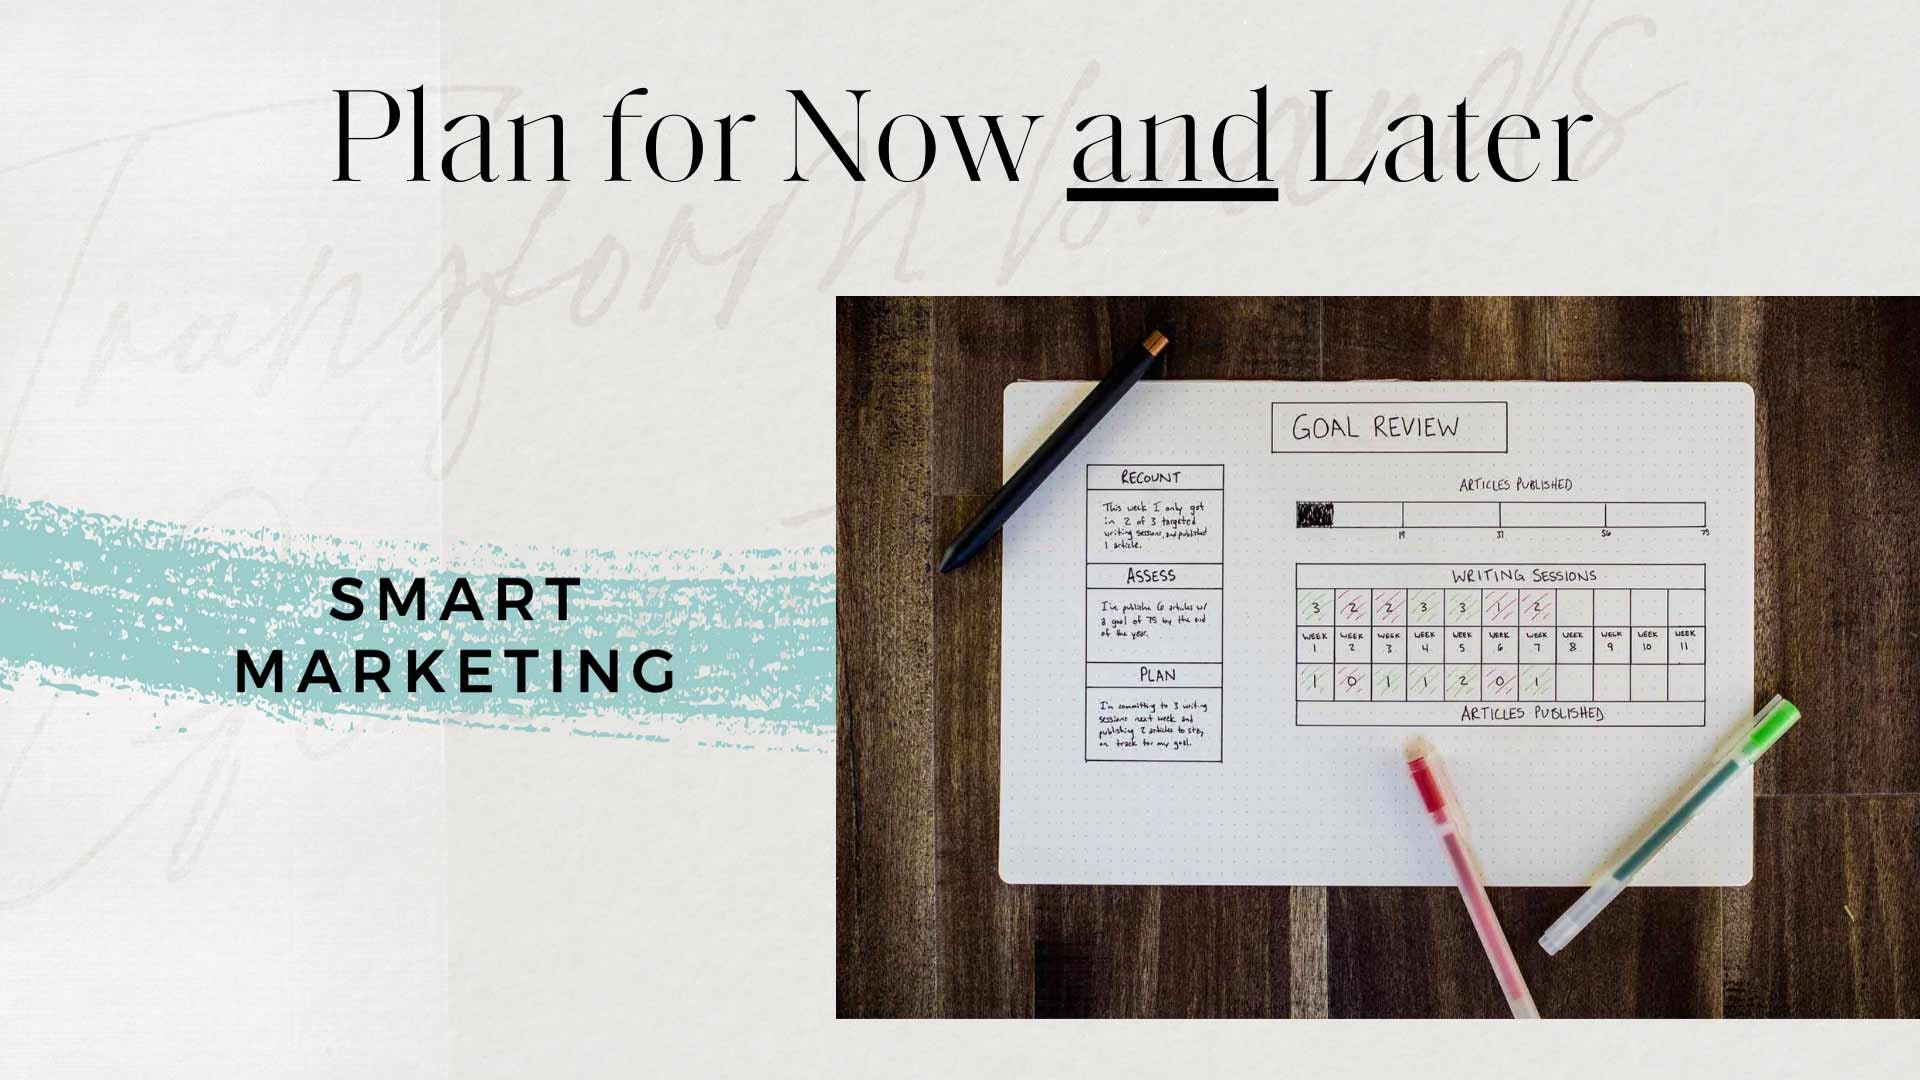 How to Maximize Short and Long-term Marketing Goals